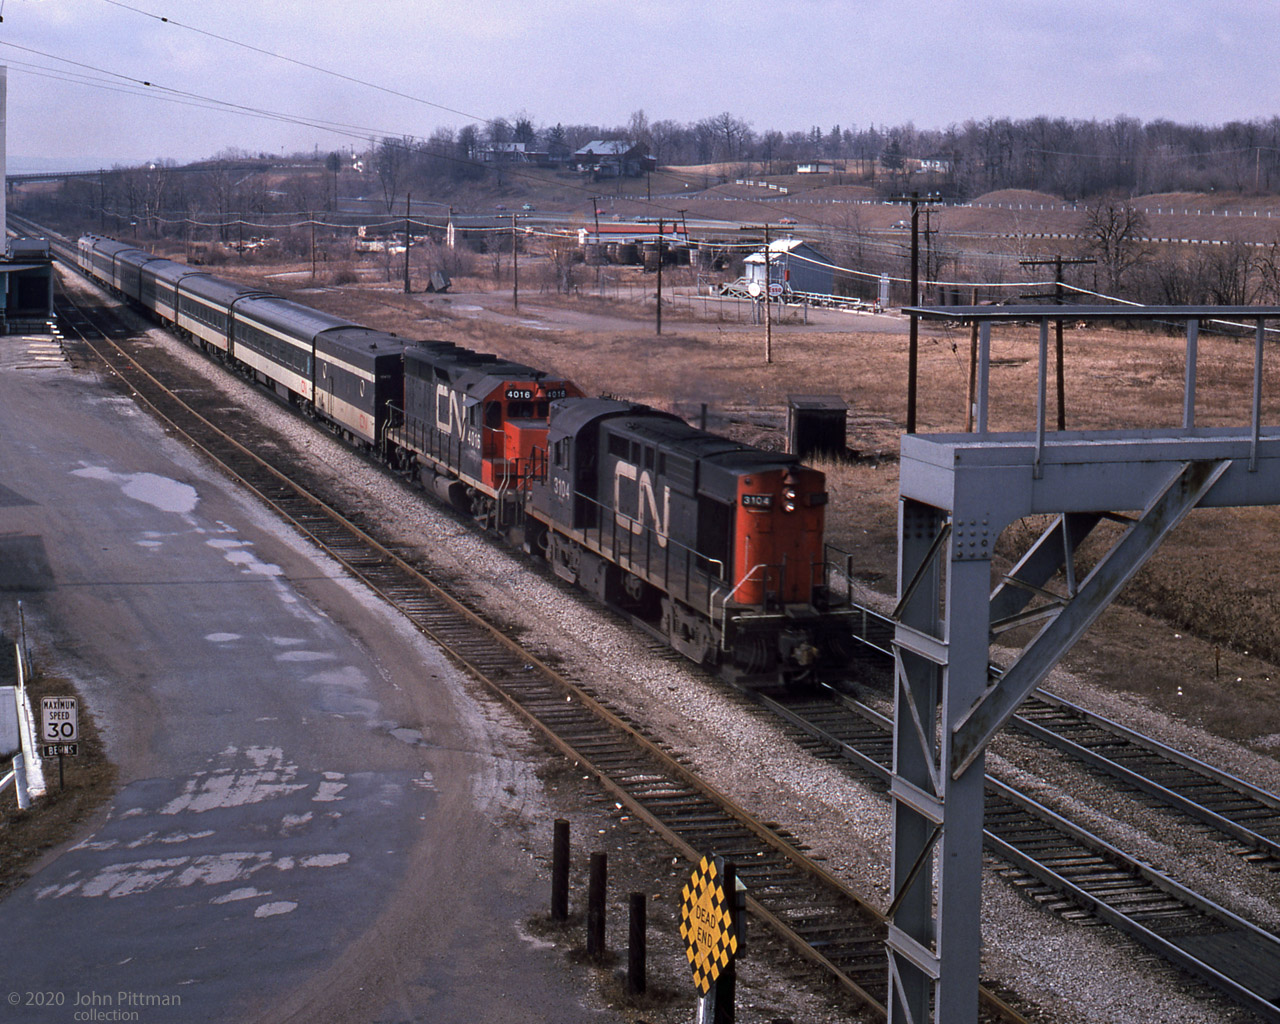 A CN morning passenger train speeds eastward past Aldershot Cold Storage, about to pass under Waterdown Road.
Powered by MLW RS-18 CN 3104 and GMD GP40 CN 4016, the train has a Steam Generator unit, 5 coaches, and looks like a baggage car trailing.
The businesses between the tracks and Highway 403, the nearest with Esso signs, are long gone. 
Perhaps they were related to the Cold Storage operation; I wonder how that area used to be accessed.
The major roads and railway remain, but much has changed since 1975.